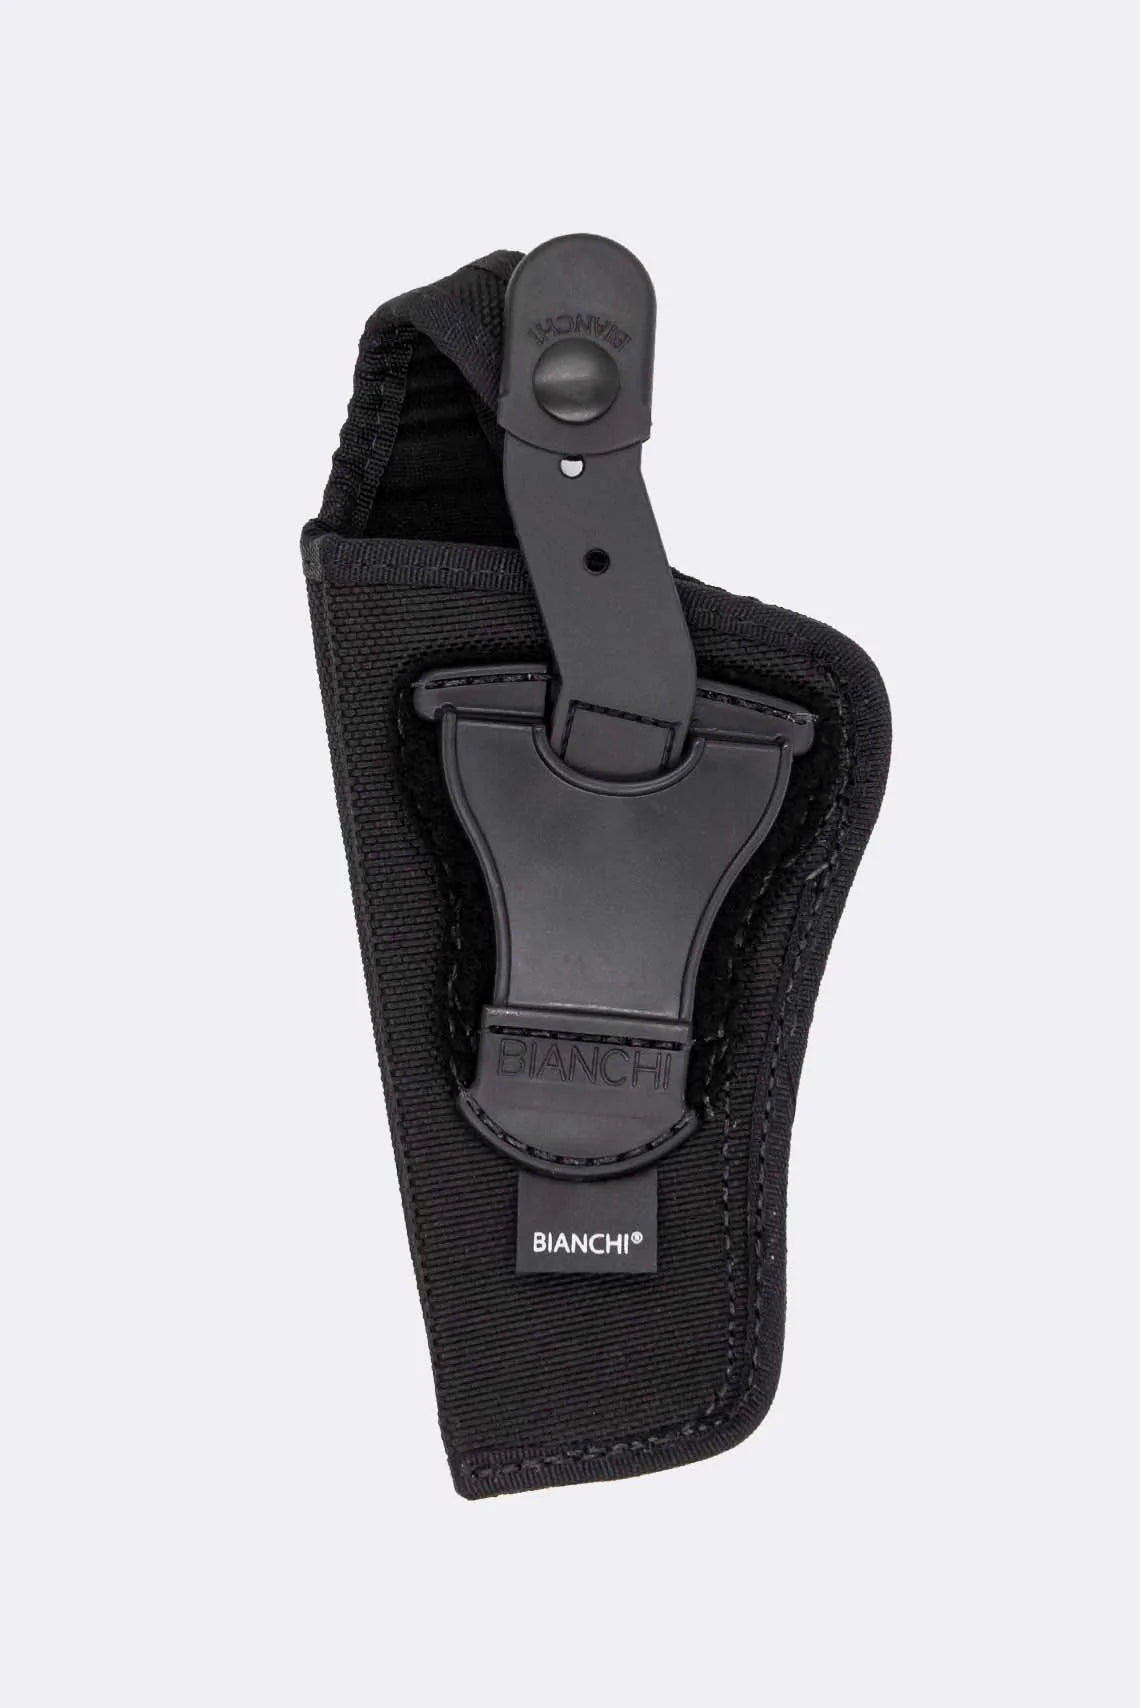 Bianchi Model 7001 AccuMold® Hip Holster with Thumbsnap Closure - Tactical & Duty Gear